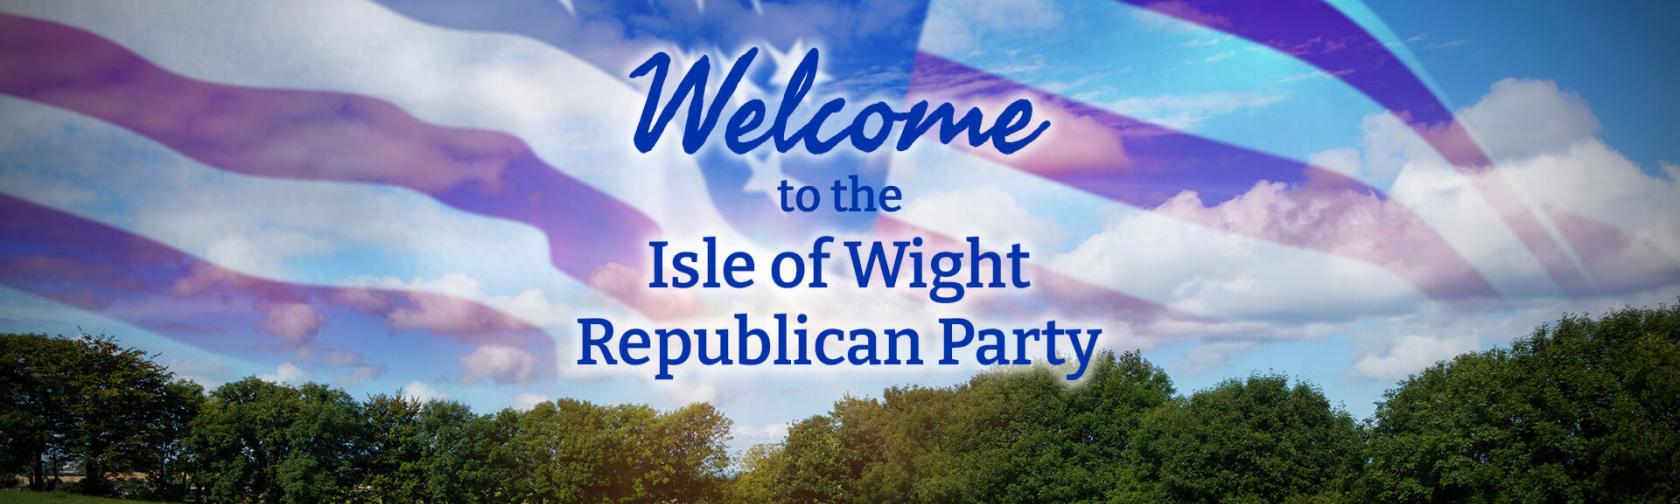 Welcome to Isle of Wight Republican Party (IOWGOP)